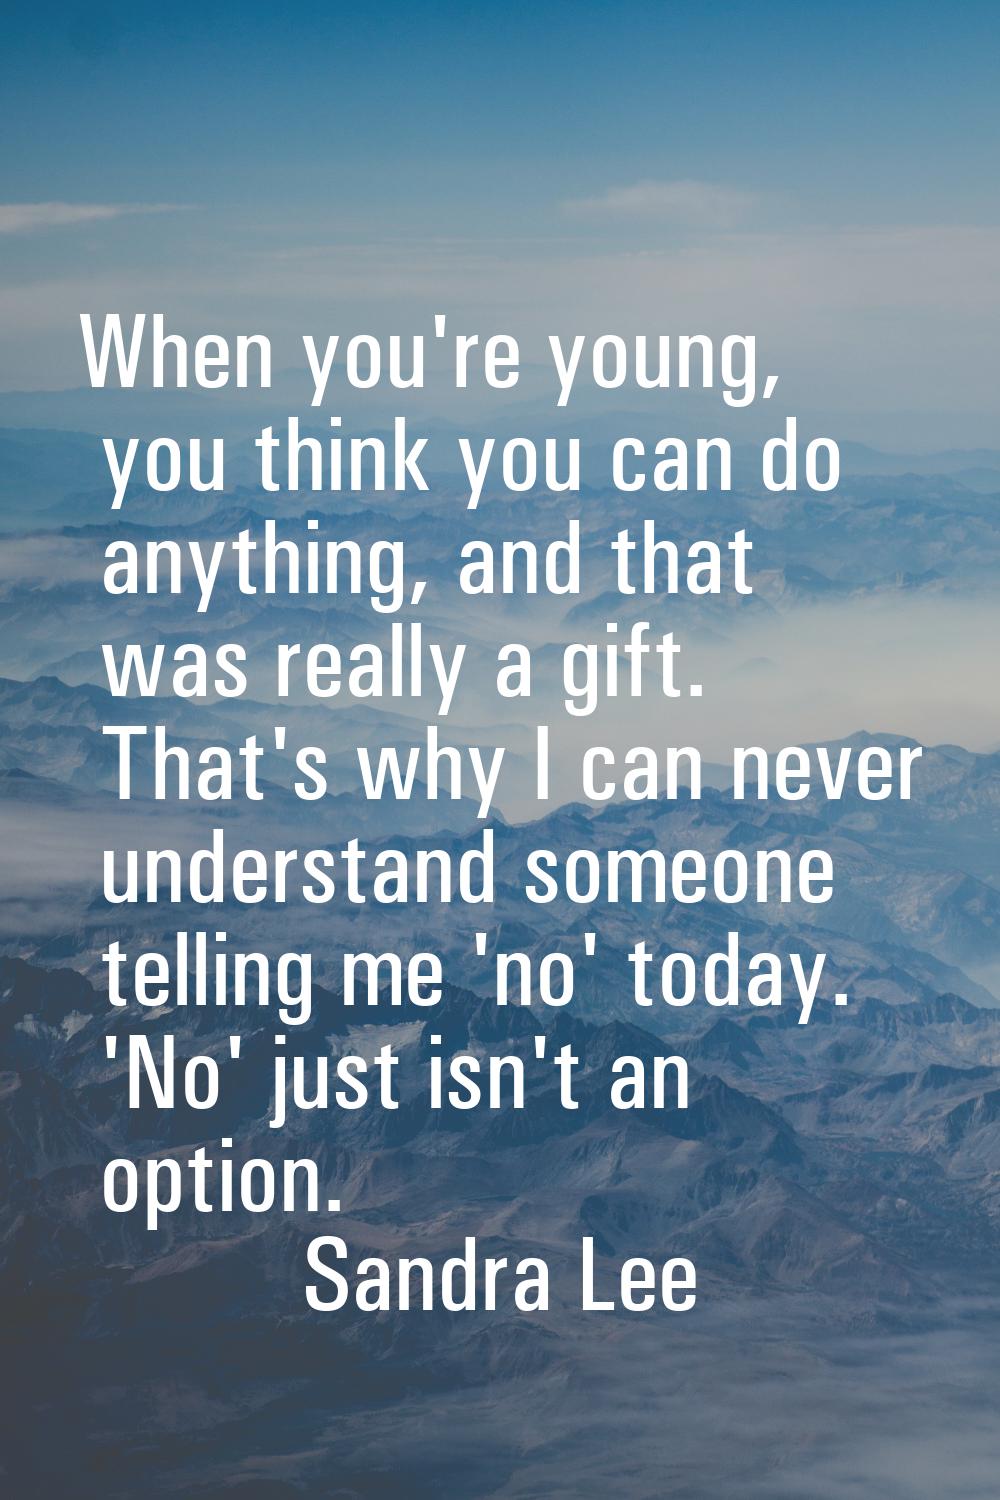 When you're young, you think you can do anything, and that was really a gift. That's why I can neve